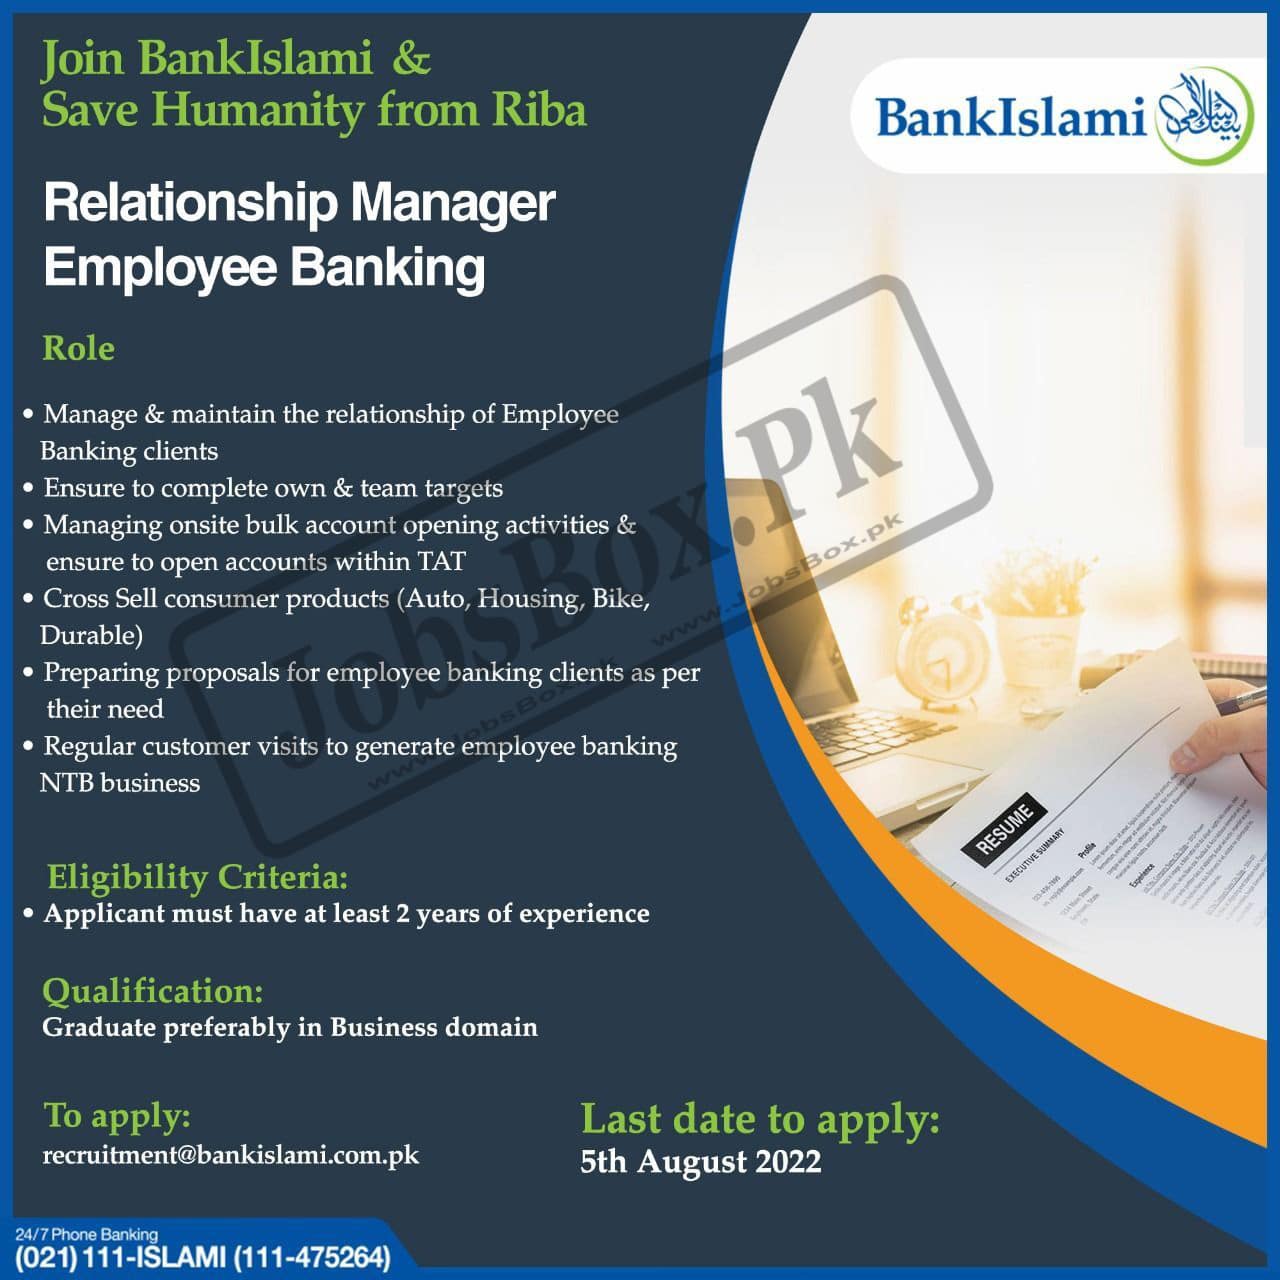 Through this page, we invite Pakistani Nationals who are searching for Banking Jobs to read the latest career opportunities announced by the BankIslami, published as Bank Islami Jobs 2022 – Apply Online at https://bankislami.com.pk/current-openings. Candidates should also visit the Bank of Punjab Careers.